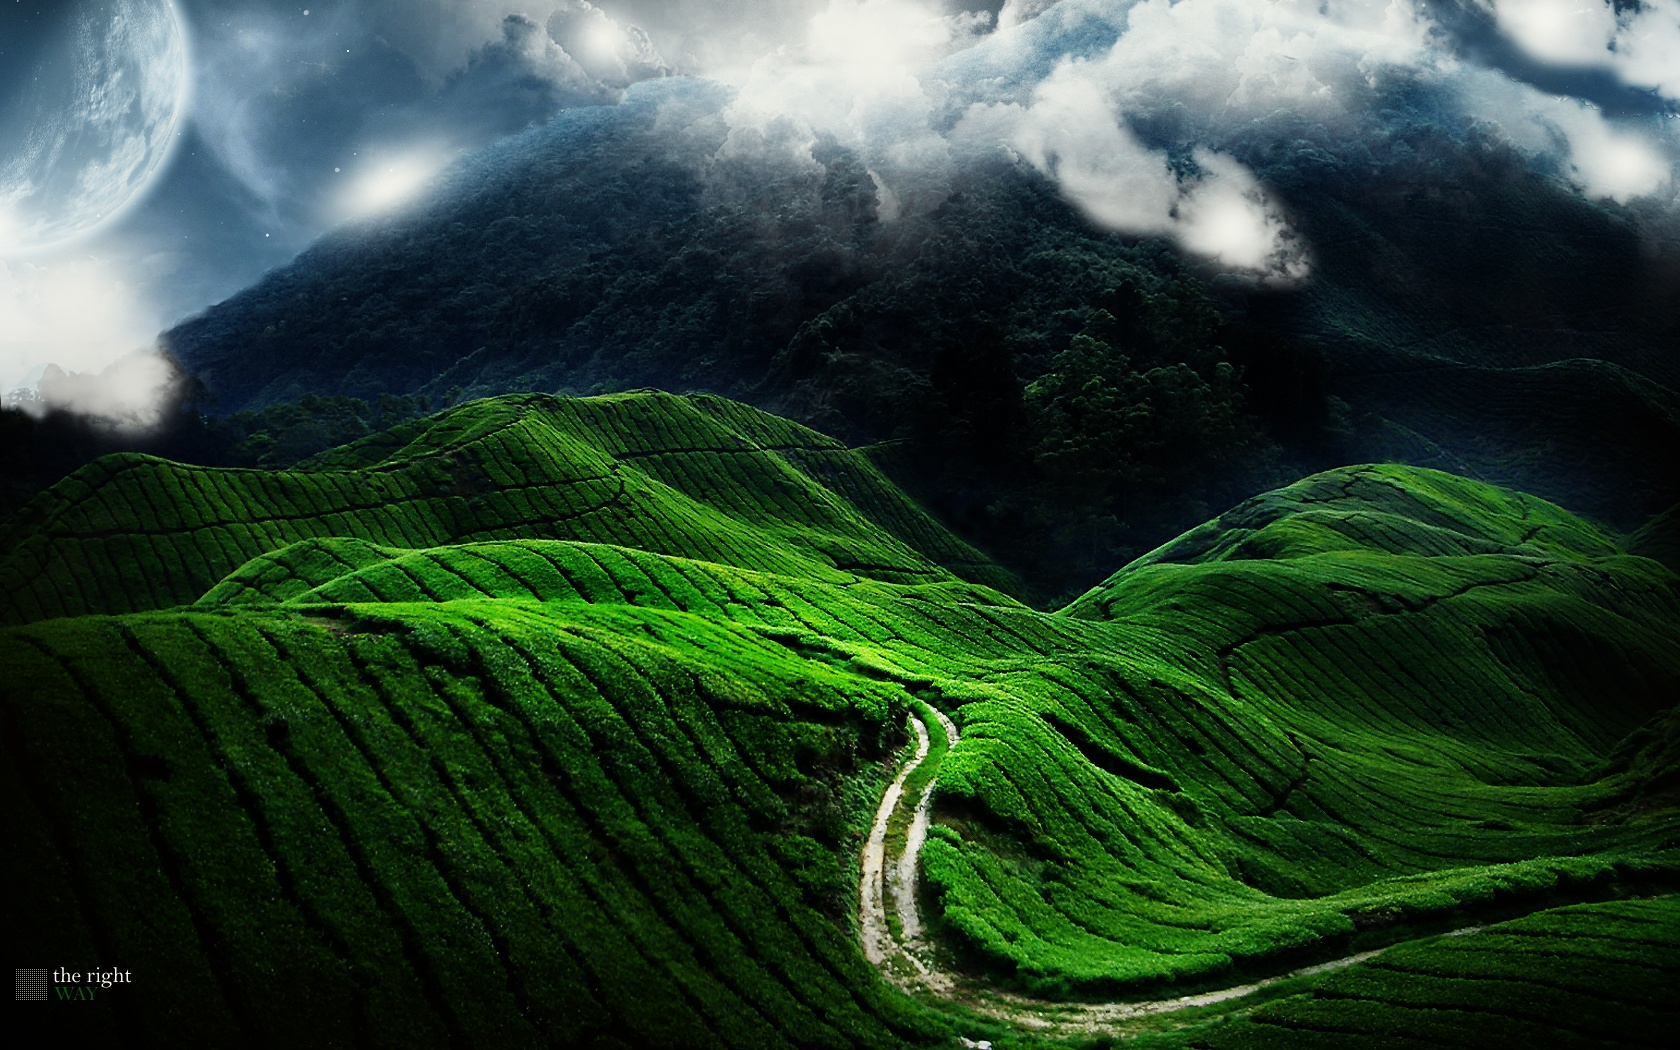 The beautiful green hills wallpapers and images - wallpapers, pictures